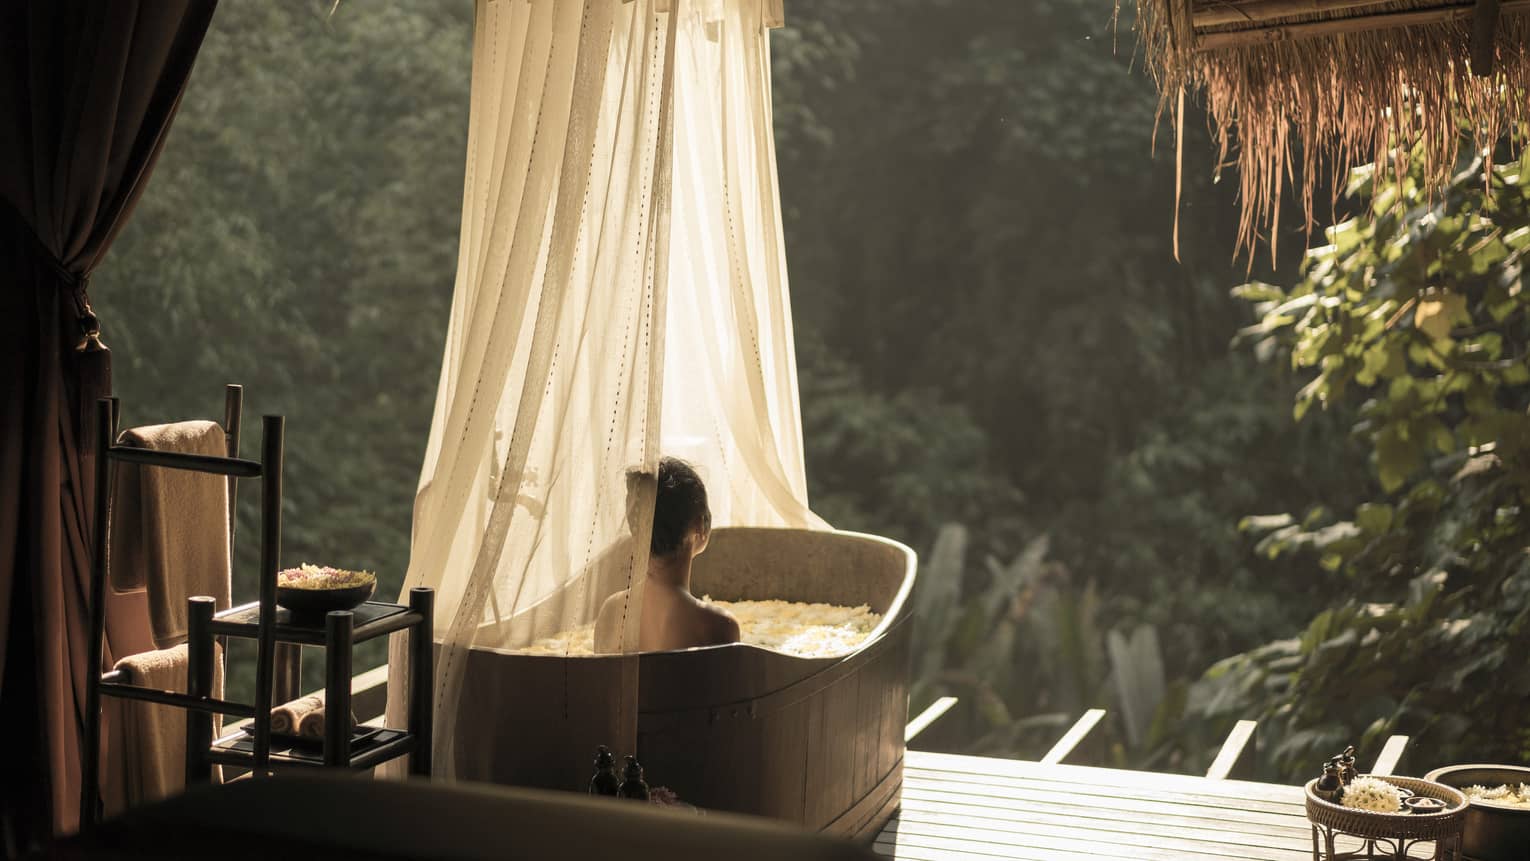 A person relaxes in an outdoor bathtub with sheer curtains, surrounded by lush greenery and sunlight. Towels and bath items are neatly arranged nearby, creating a serene spa atmosphere.